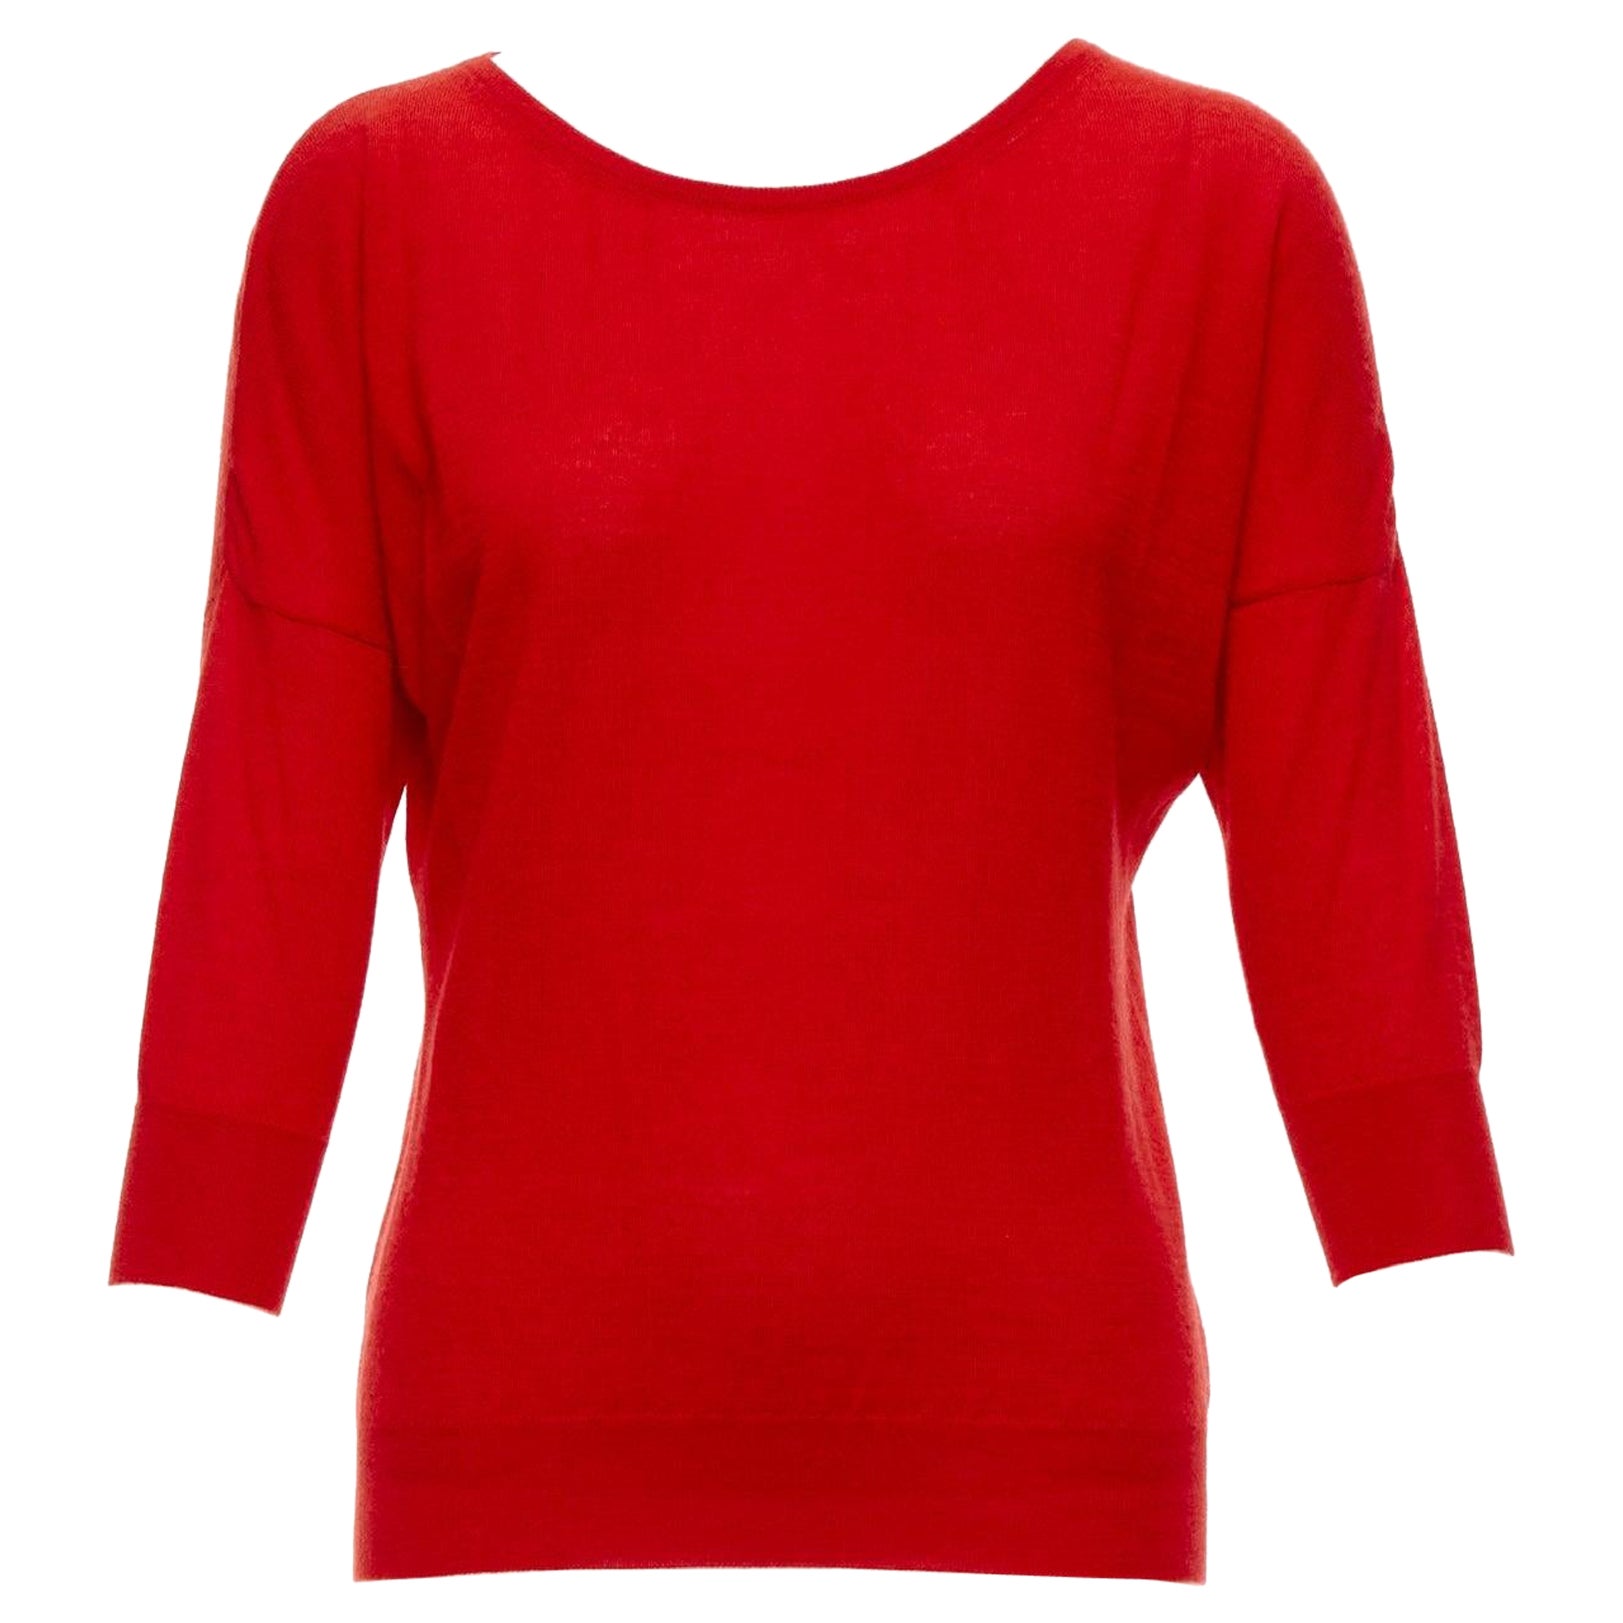 ALEXANDER MCQUEEN 100% cashmere red drop sleeve wide neck sweater top XS For Sale